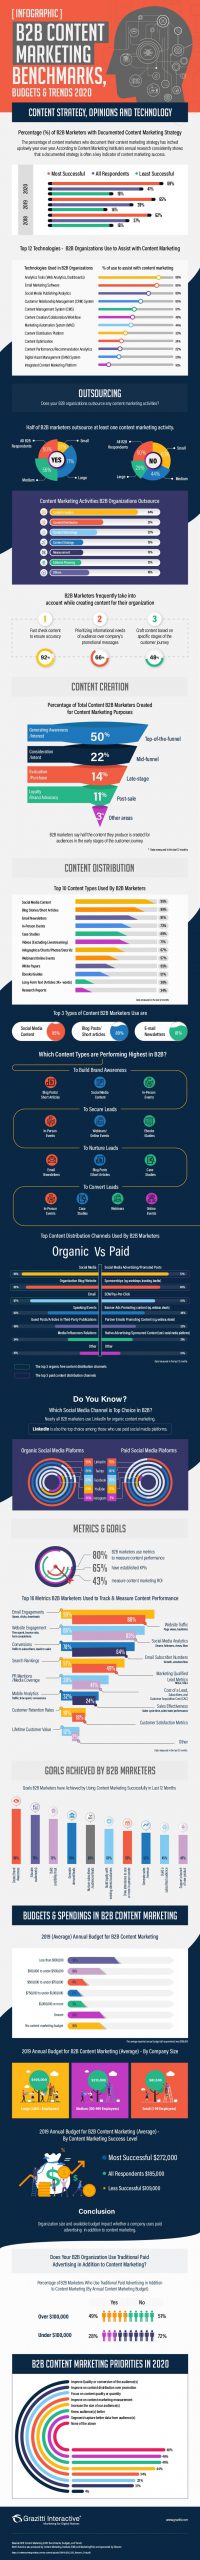 b2b content marketing benchmarks budgets and trends 2020 infographic scaled 1